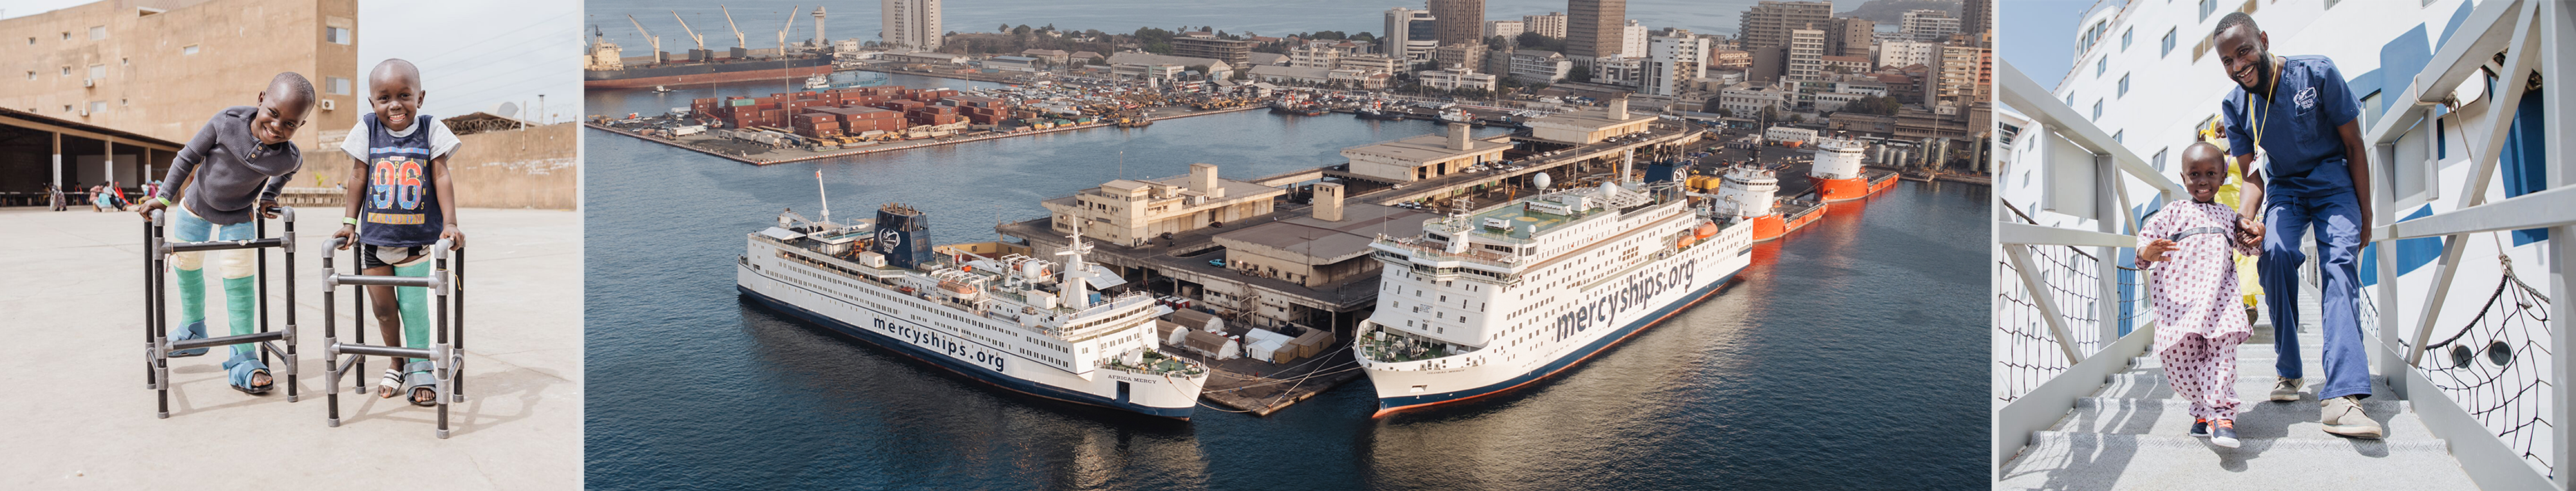 Mercy Ships Images